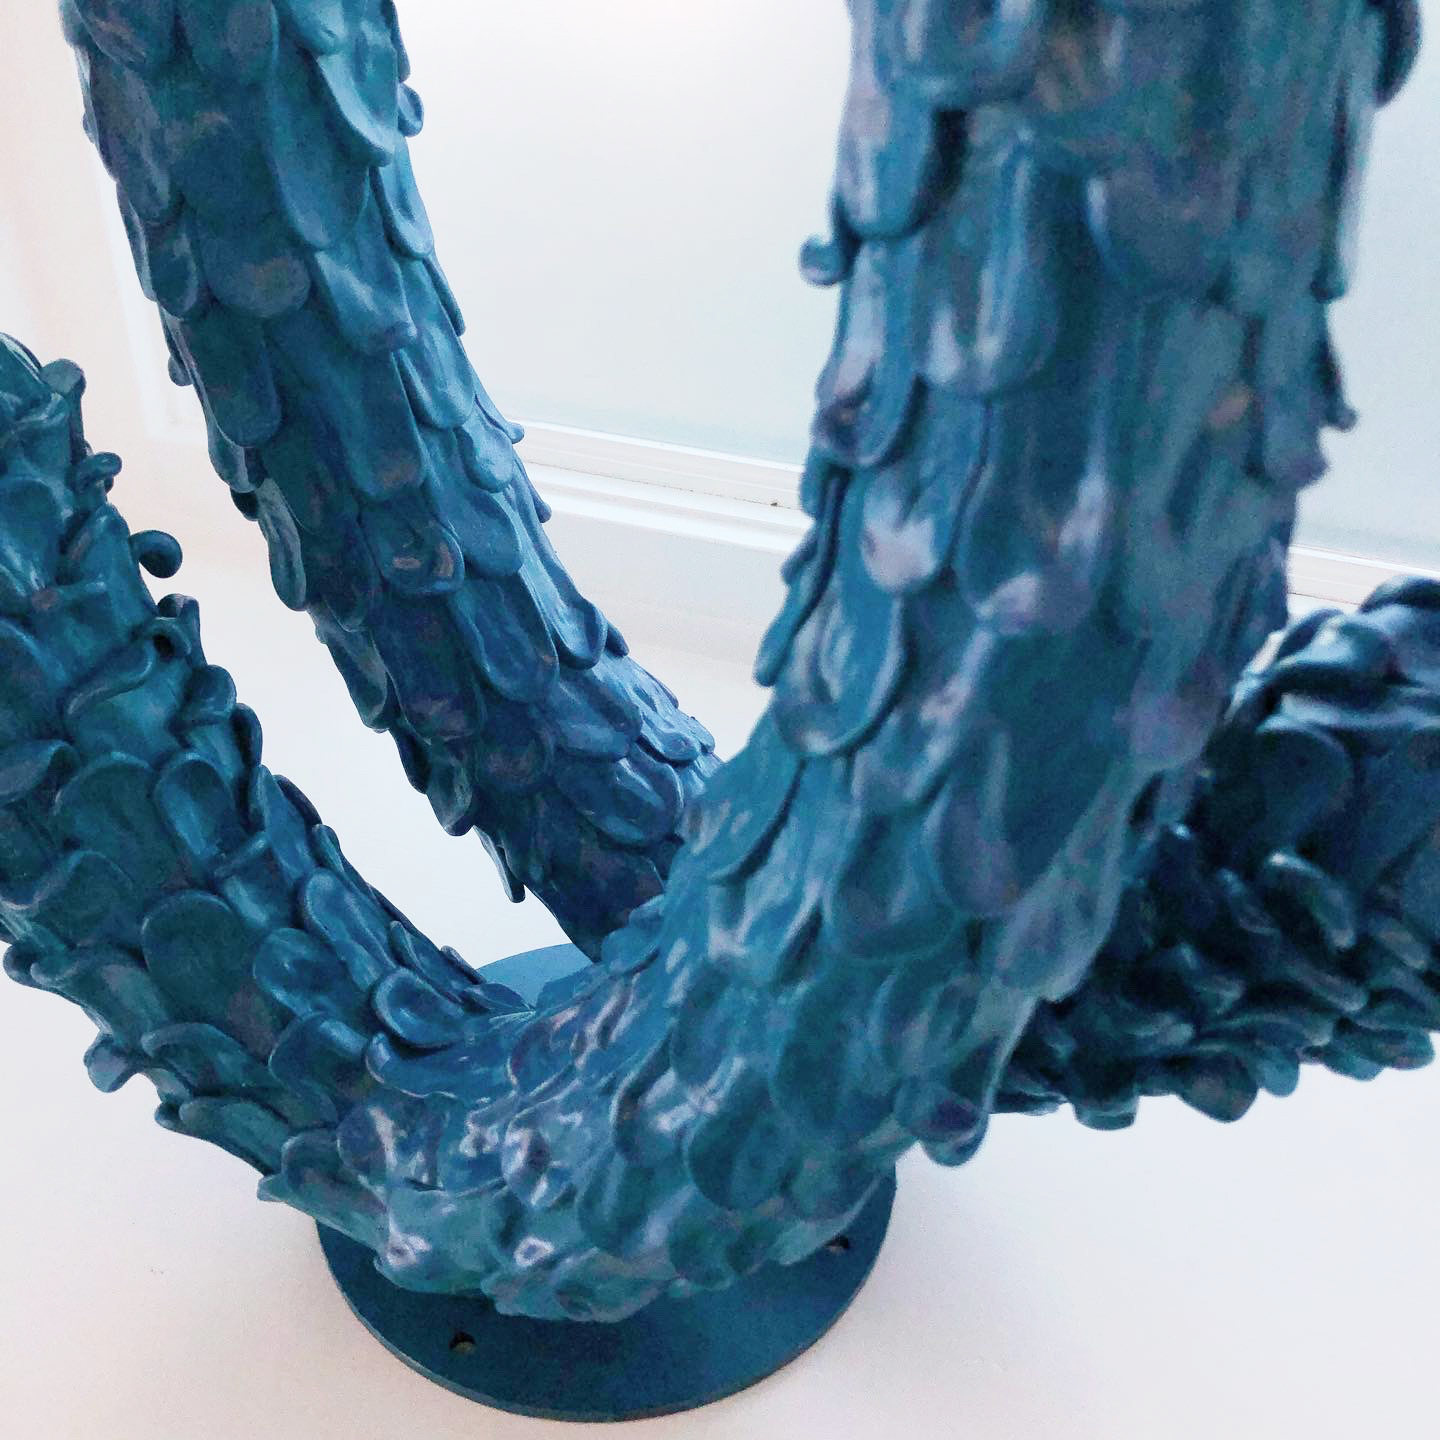 detail of blue abstract sculpture